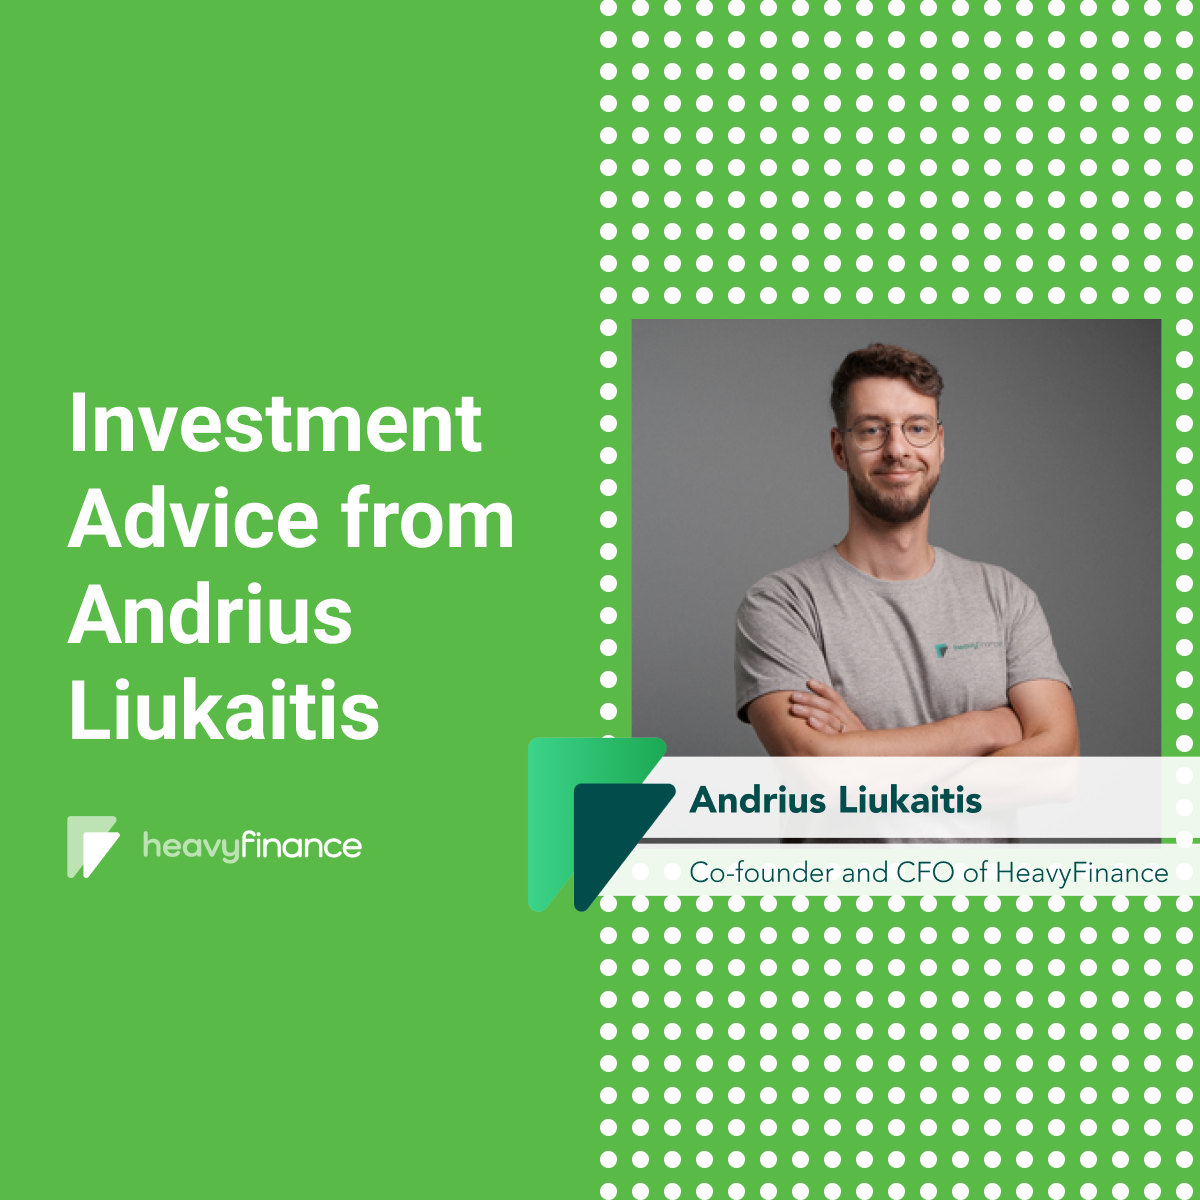 Investment Advice from Andrius Liukaitis on how to invest 10k